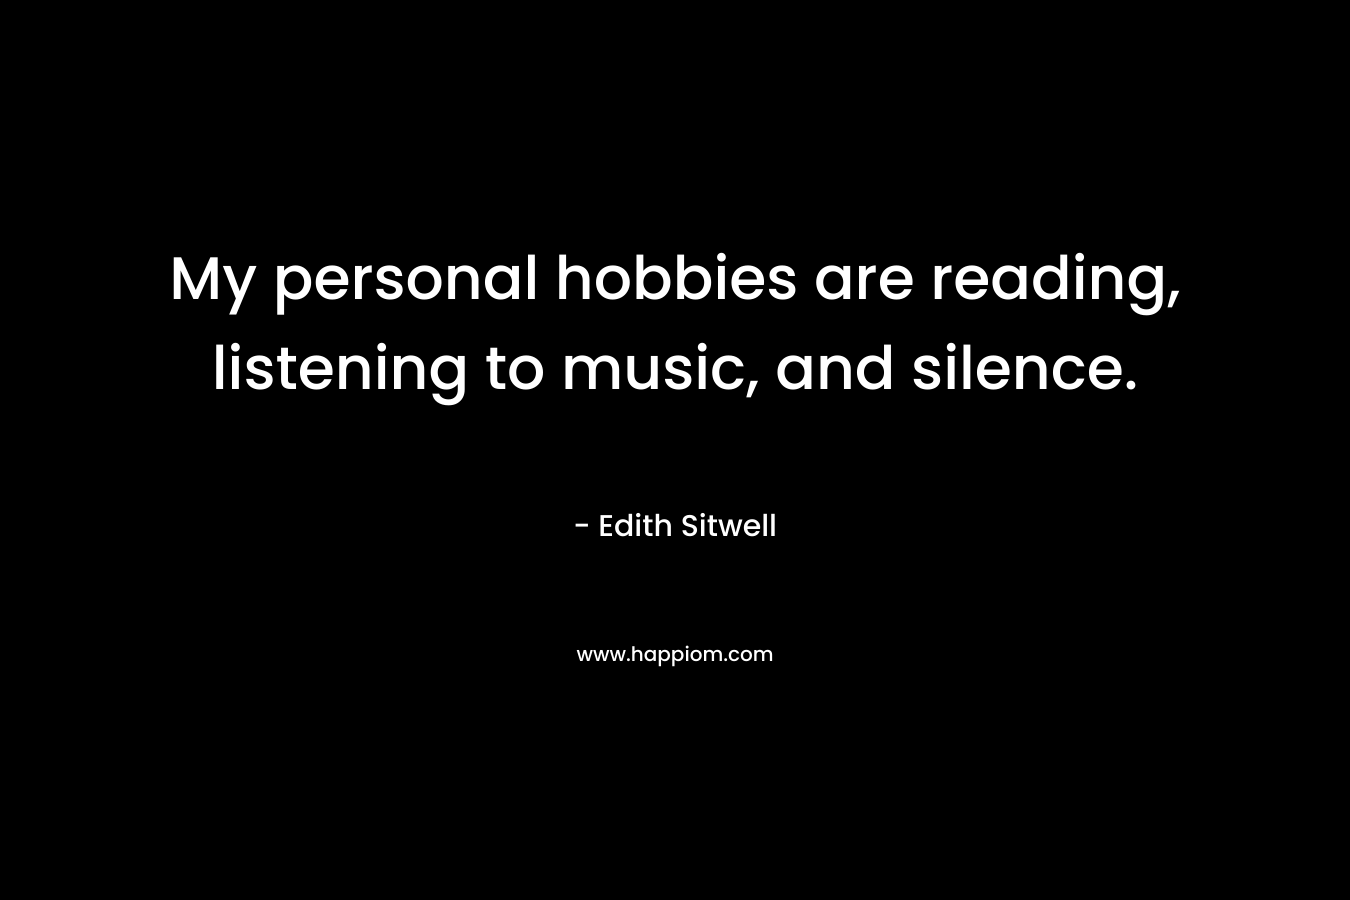 My personal hobbies are reading, listening to music, and silence. – Edith Sitwell